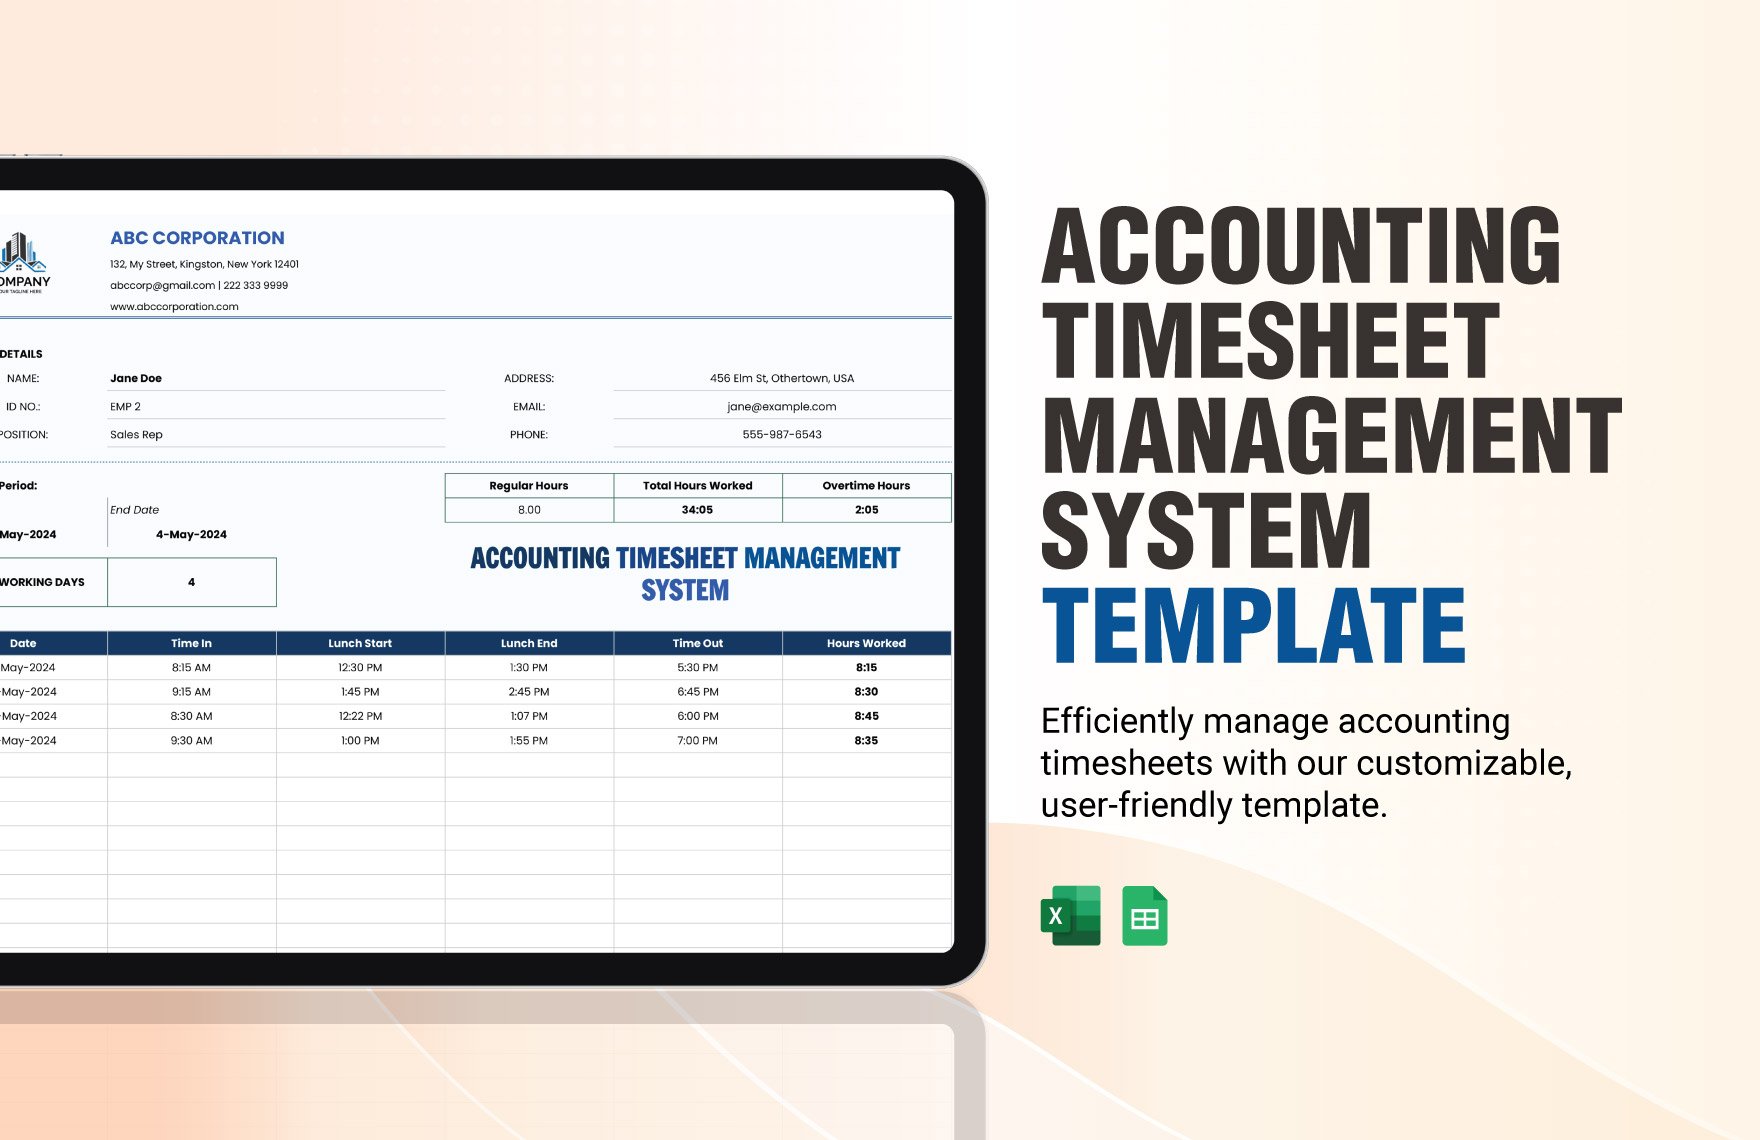 Accounting Timesheet Management System Template in Excel, Google Sheets